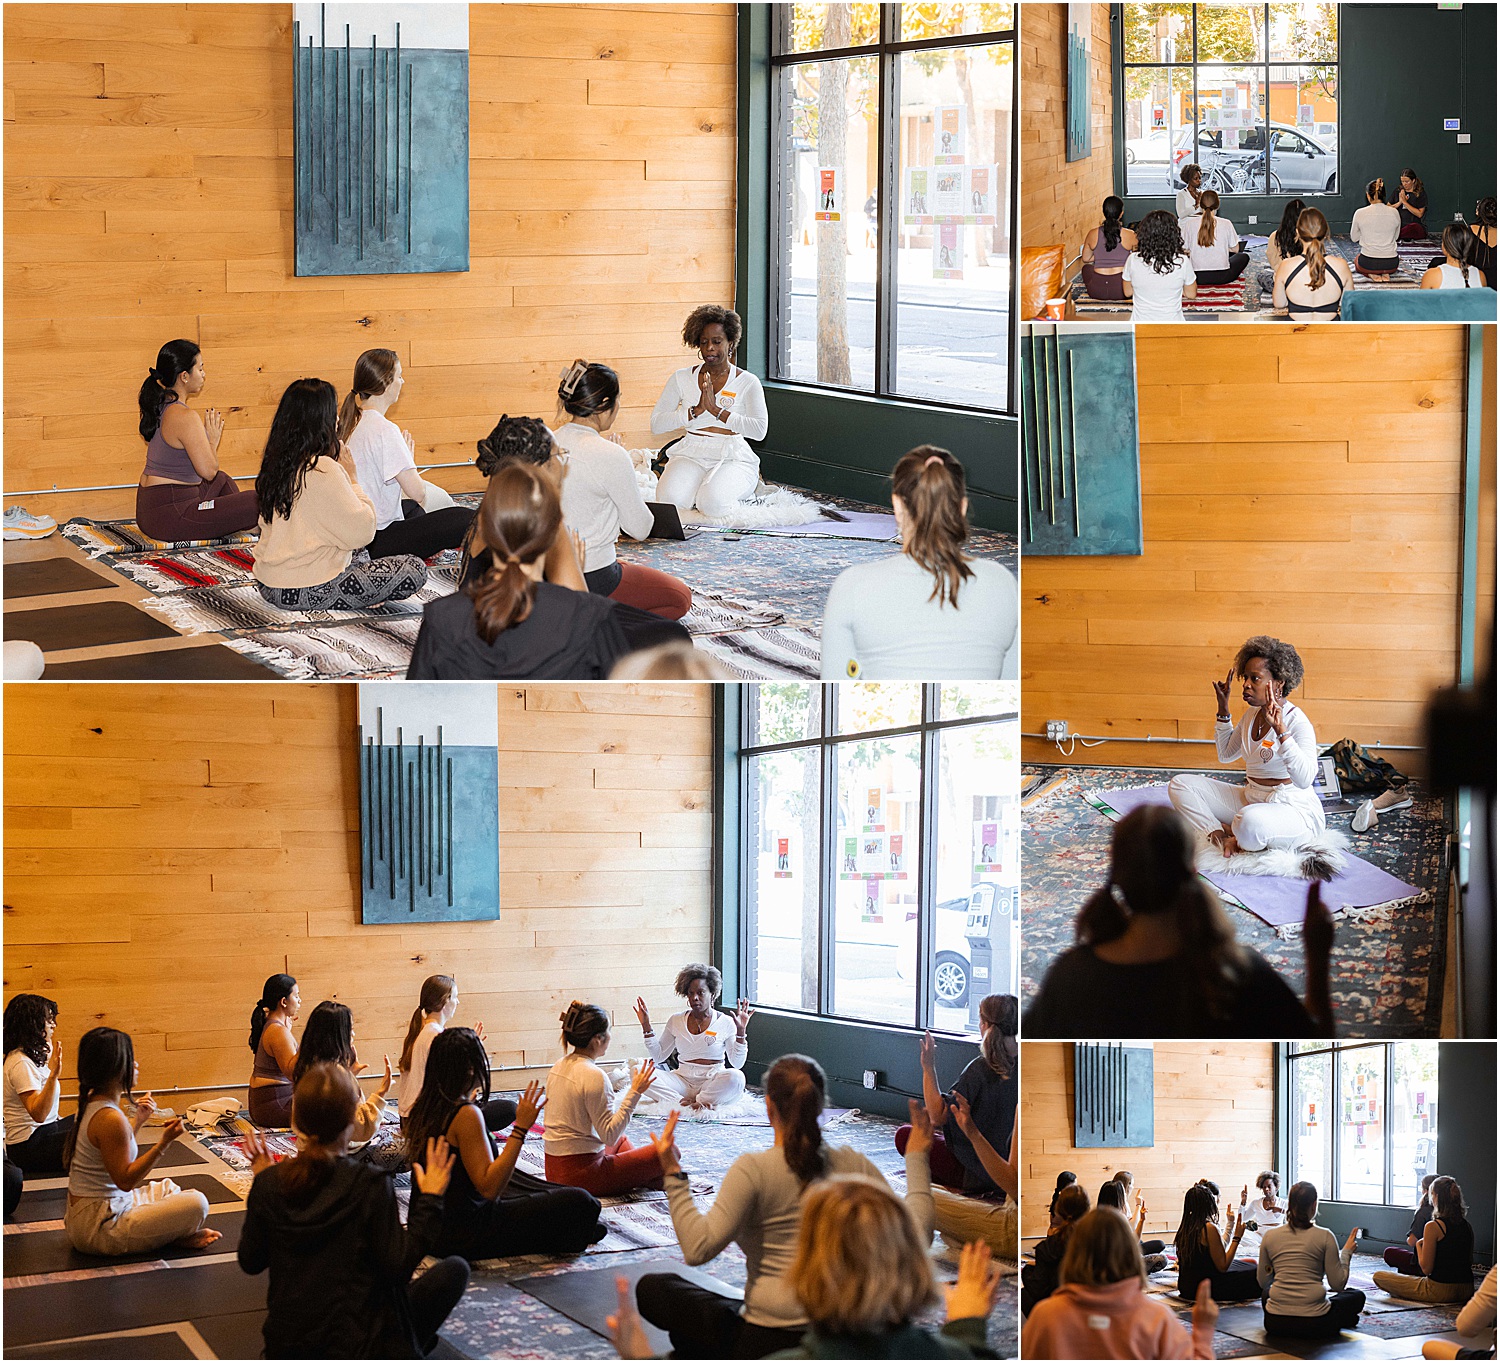 Women practice meditation and yoga together at Brand Events hosted by ComePlum